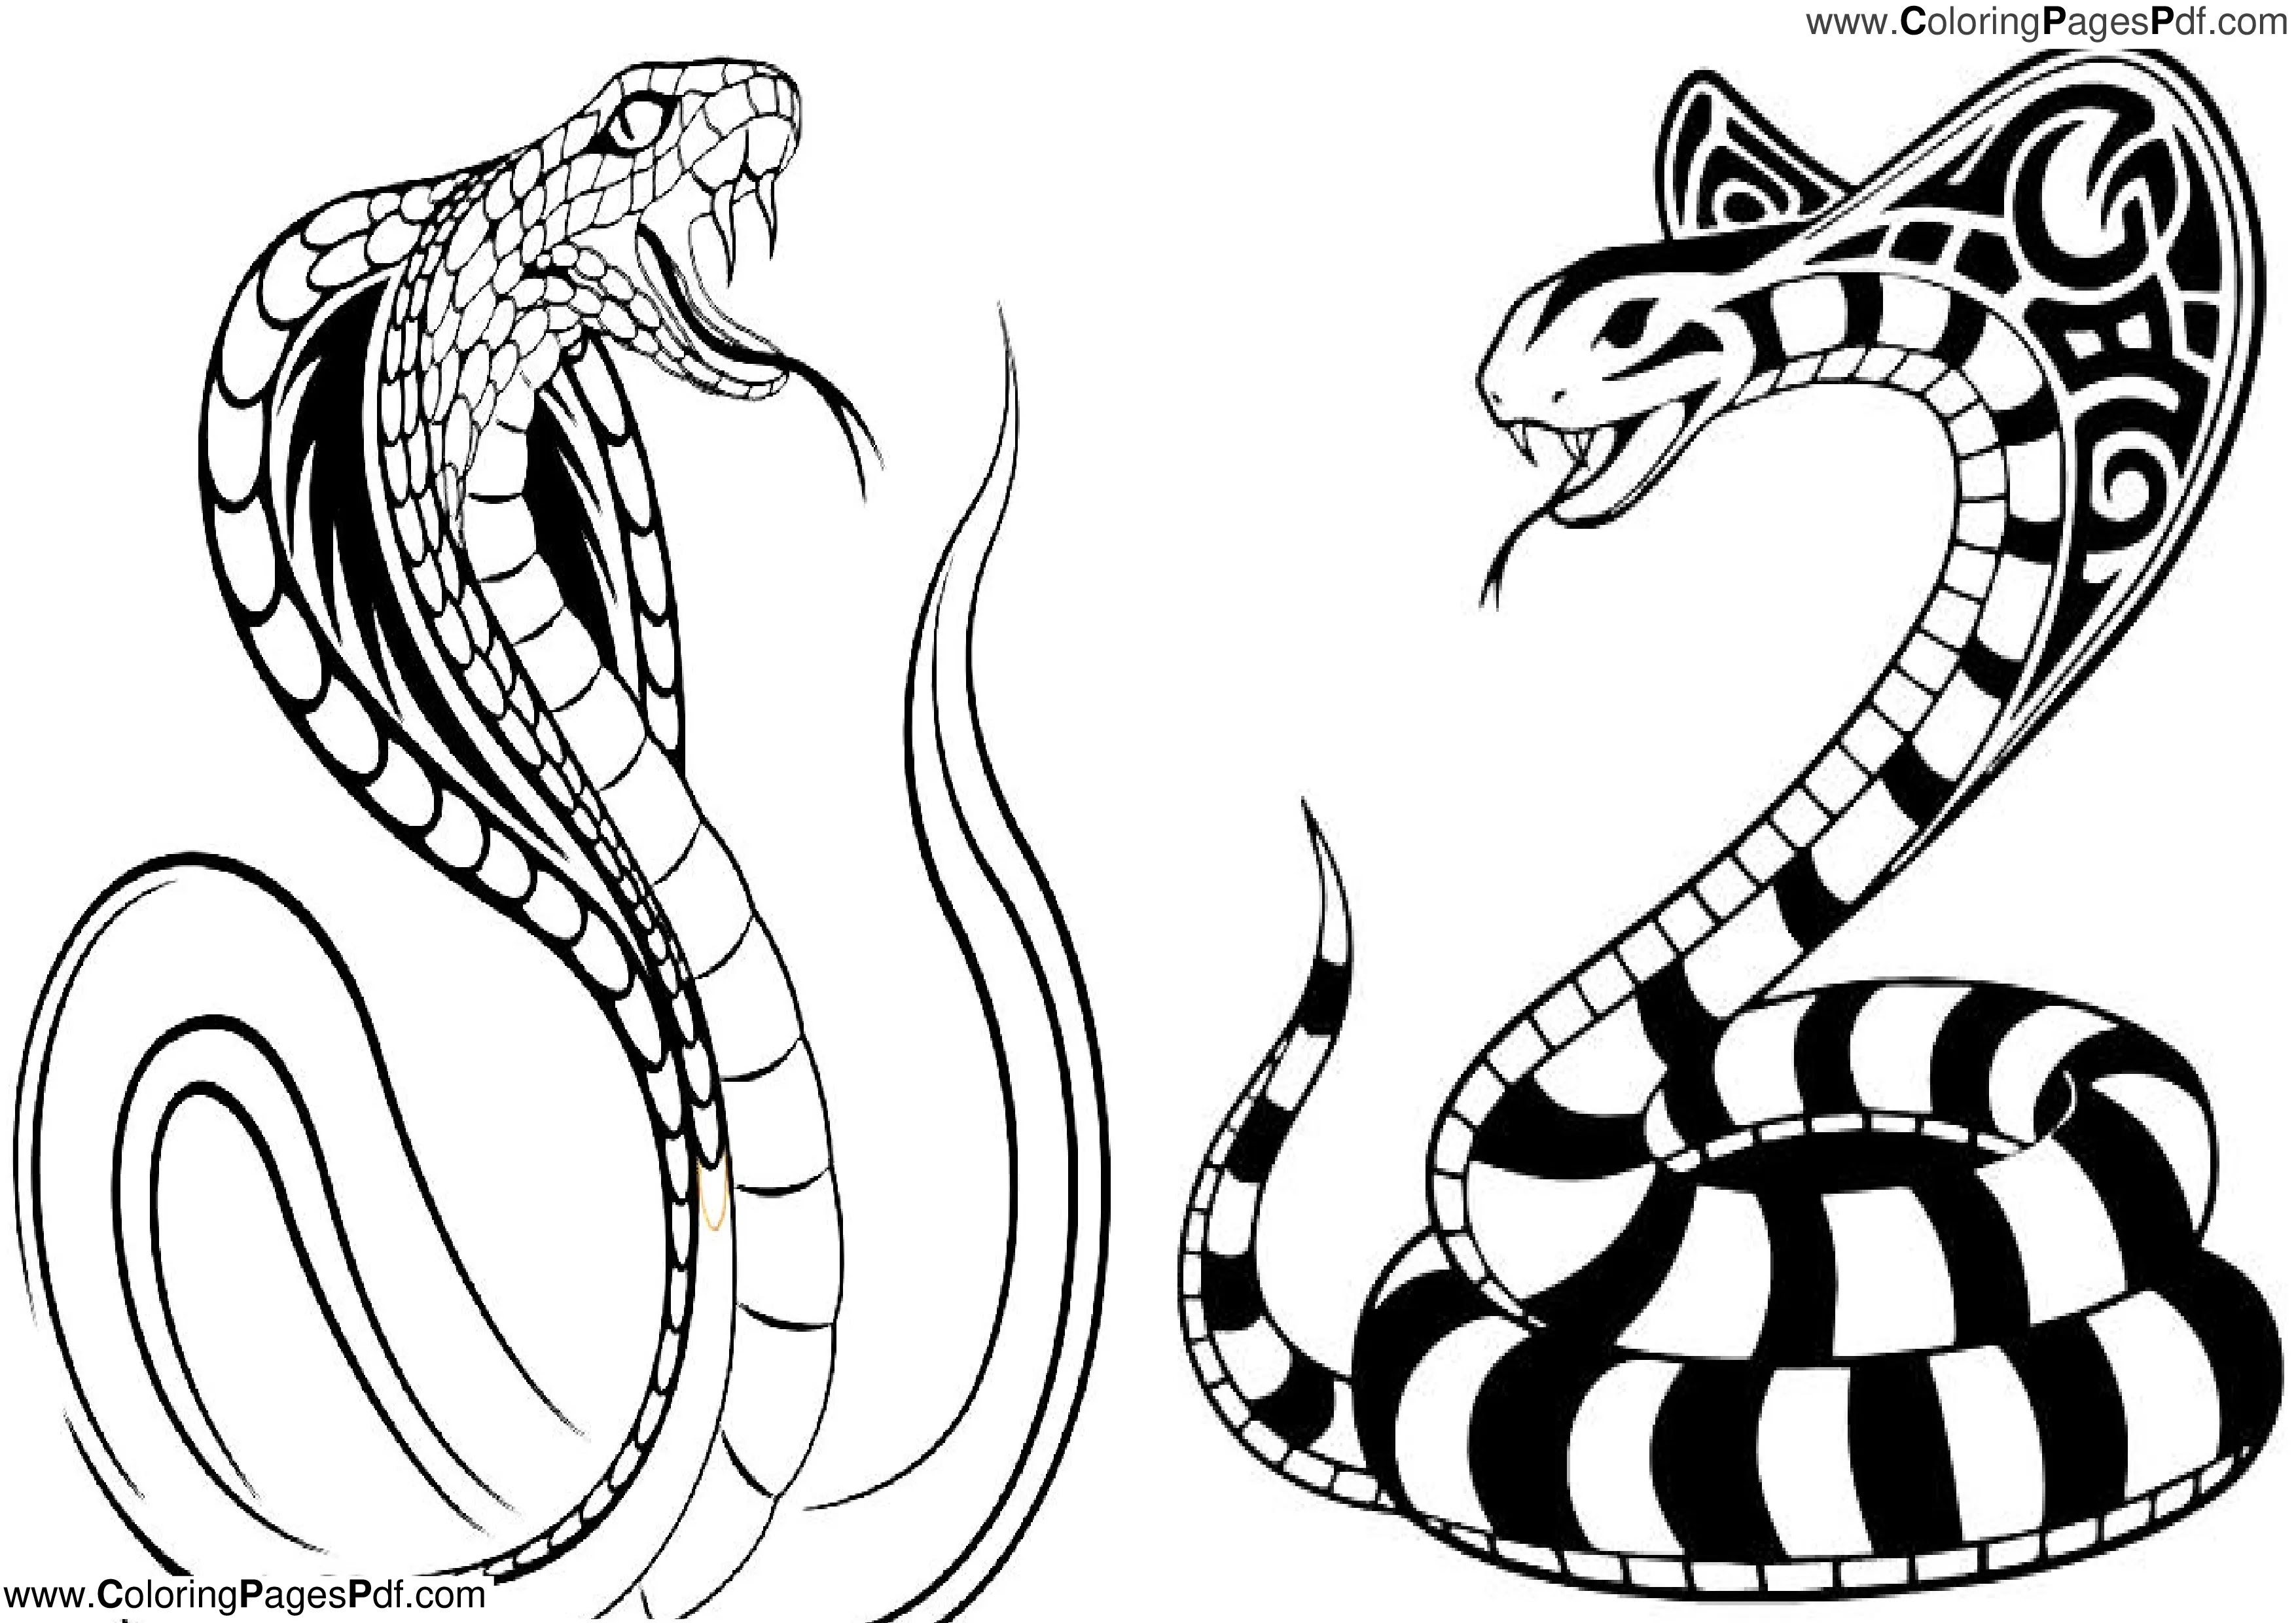 Realistic Snake coloring page